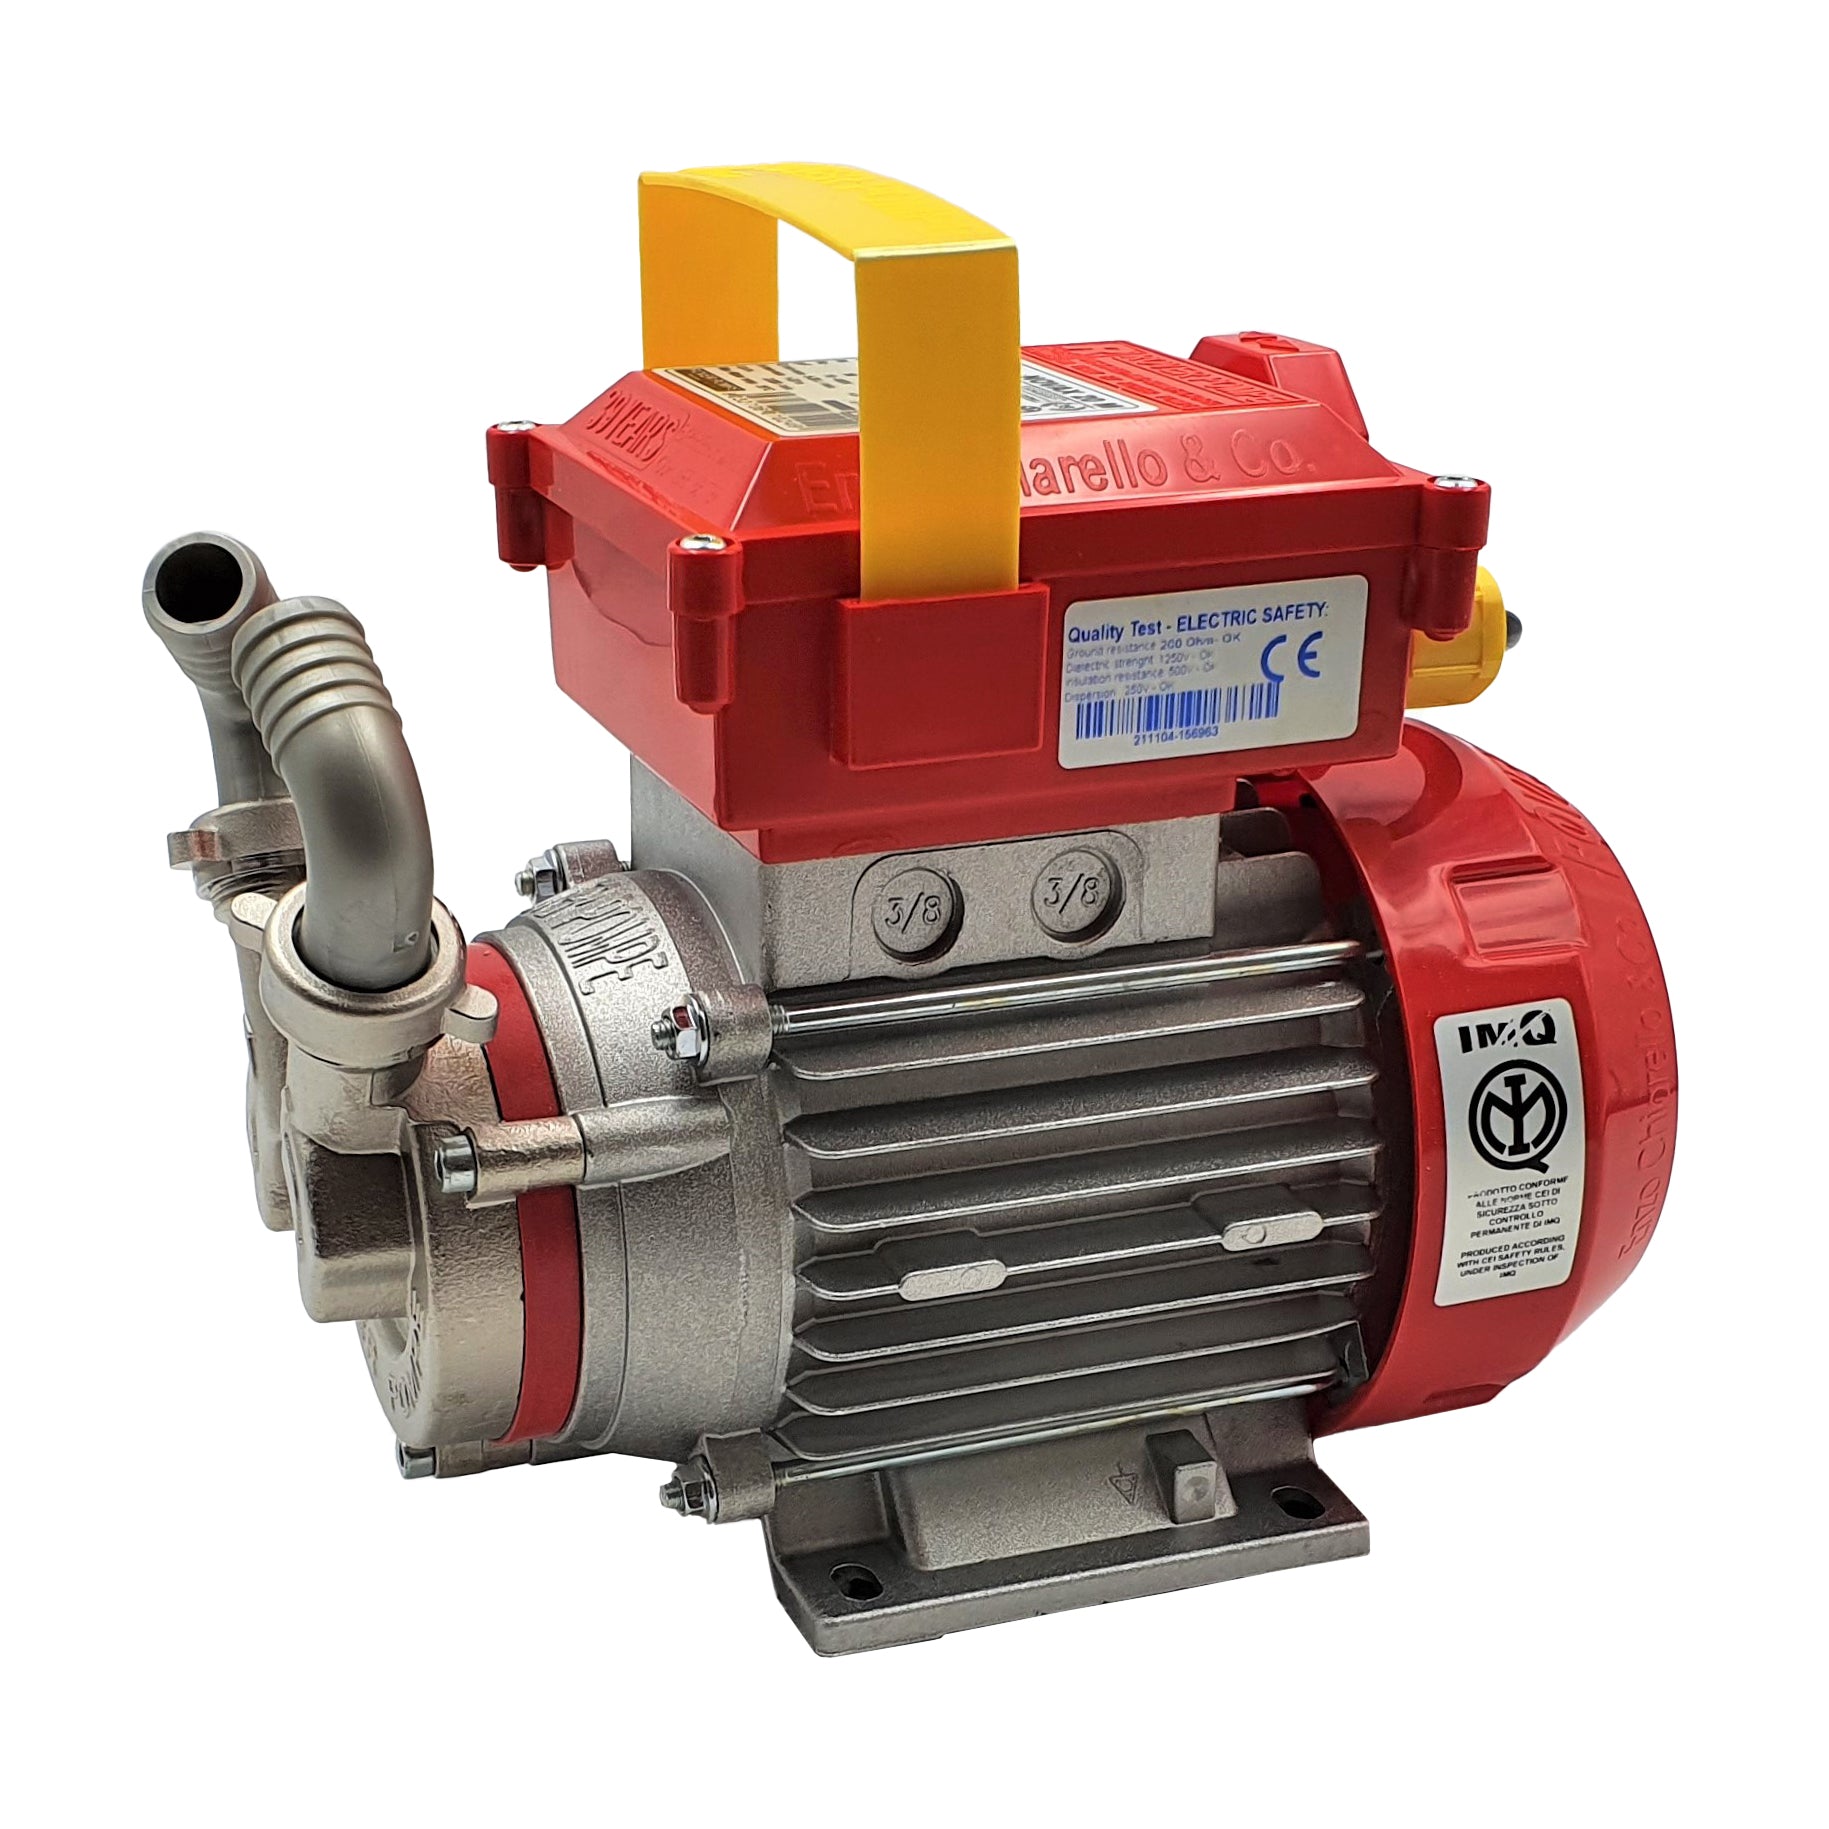 Italian Made rover pump novax 20-m by-pass self priming pump for liquids. quality tested for electrical safety